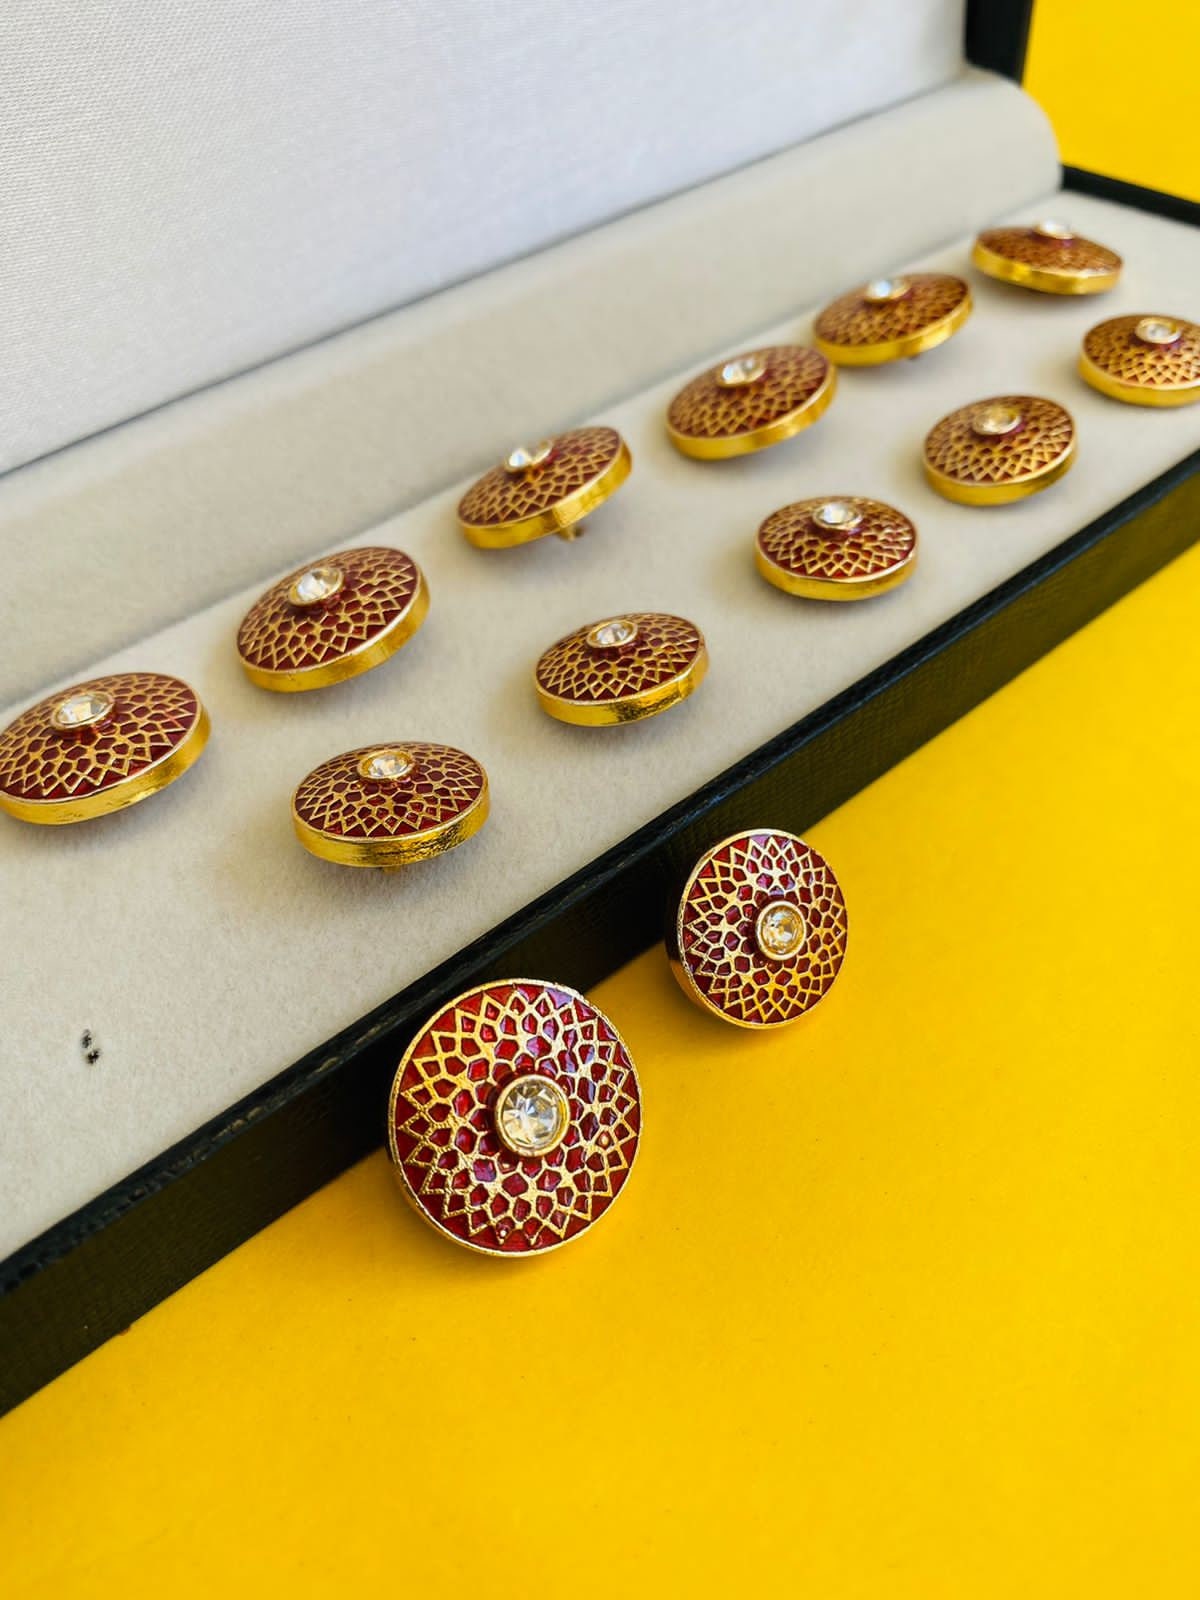 sherwani button Gold Plated Zircon 925 Sterling Silver Buttons